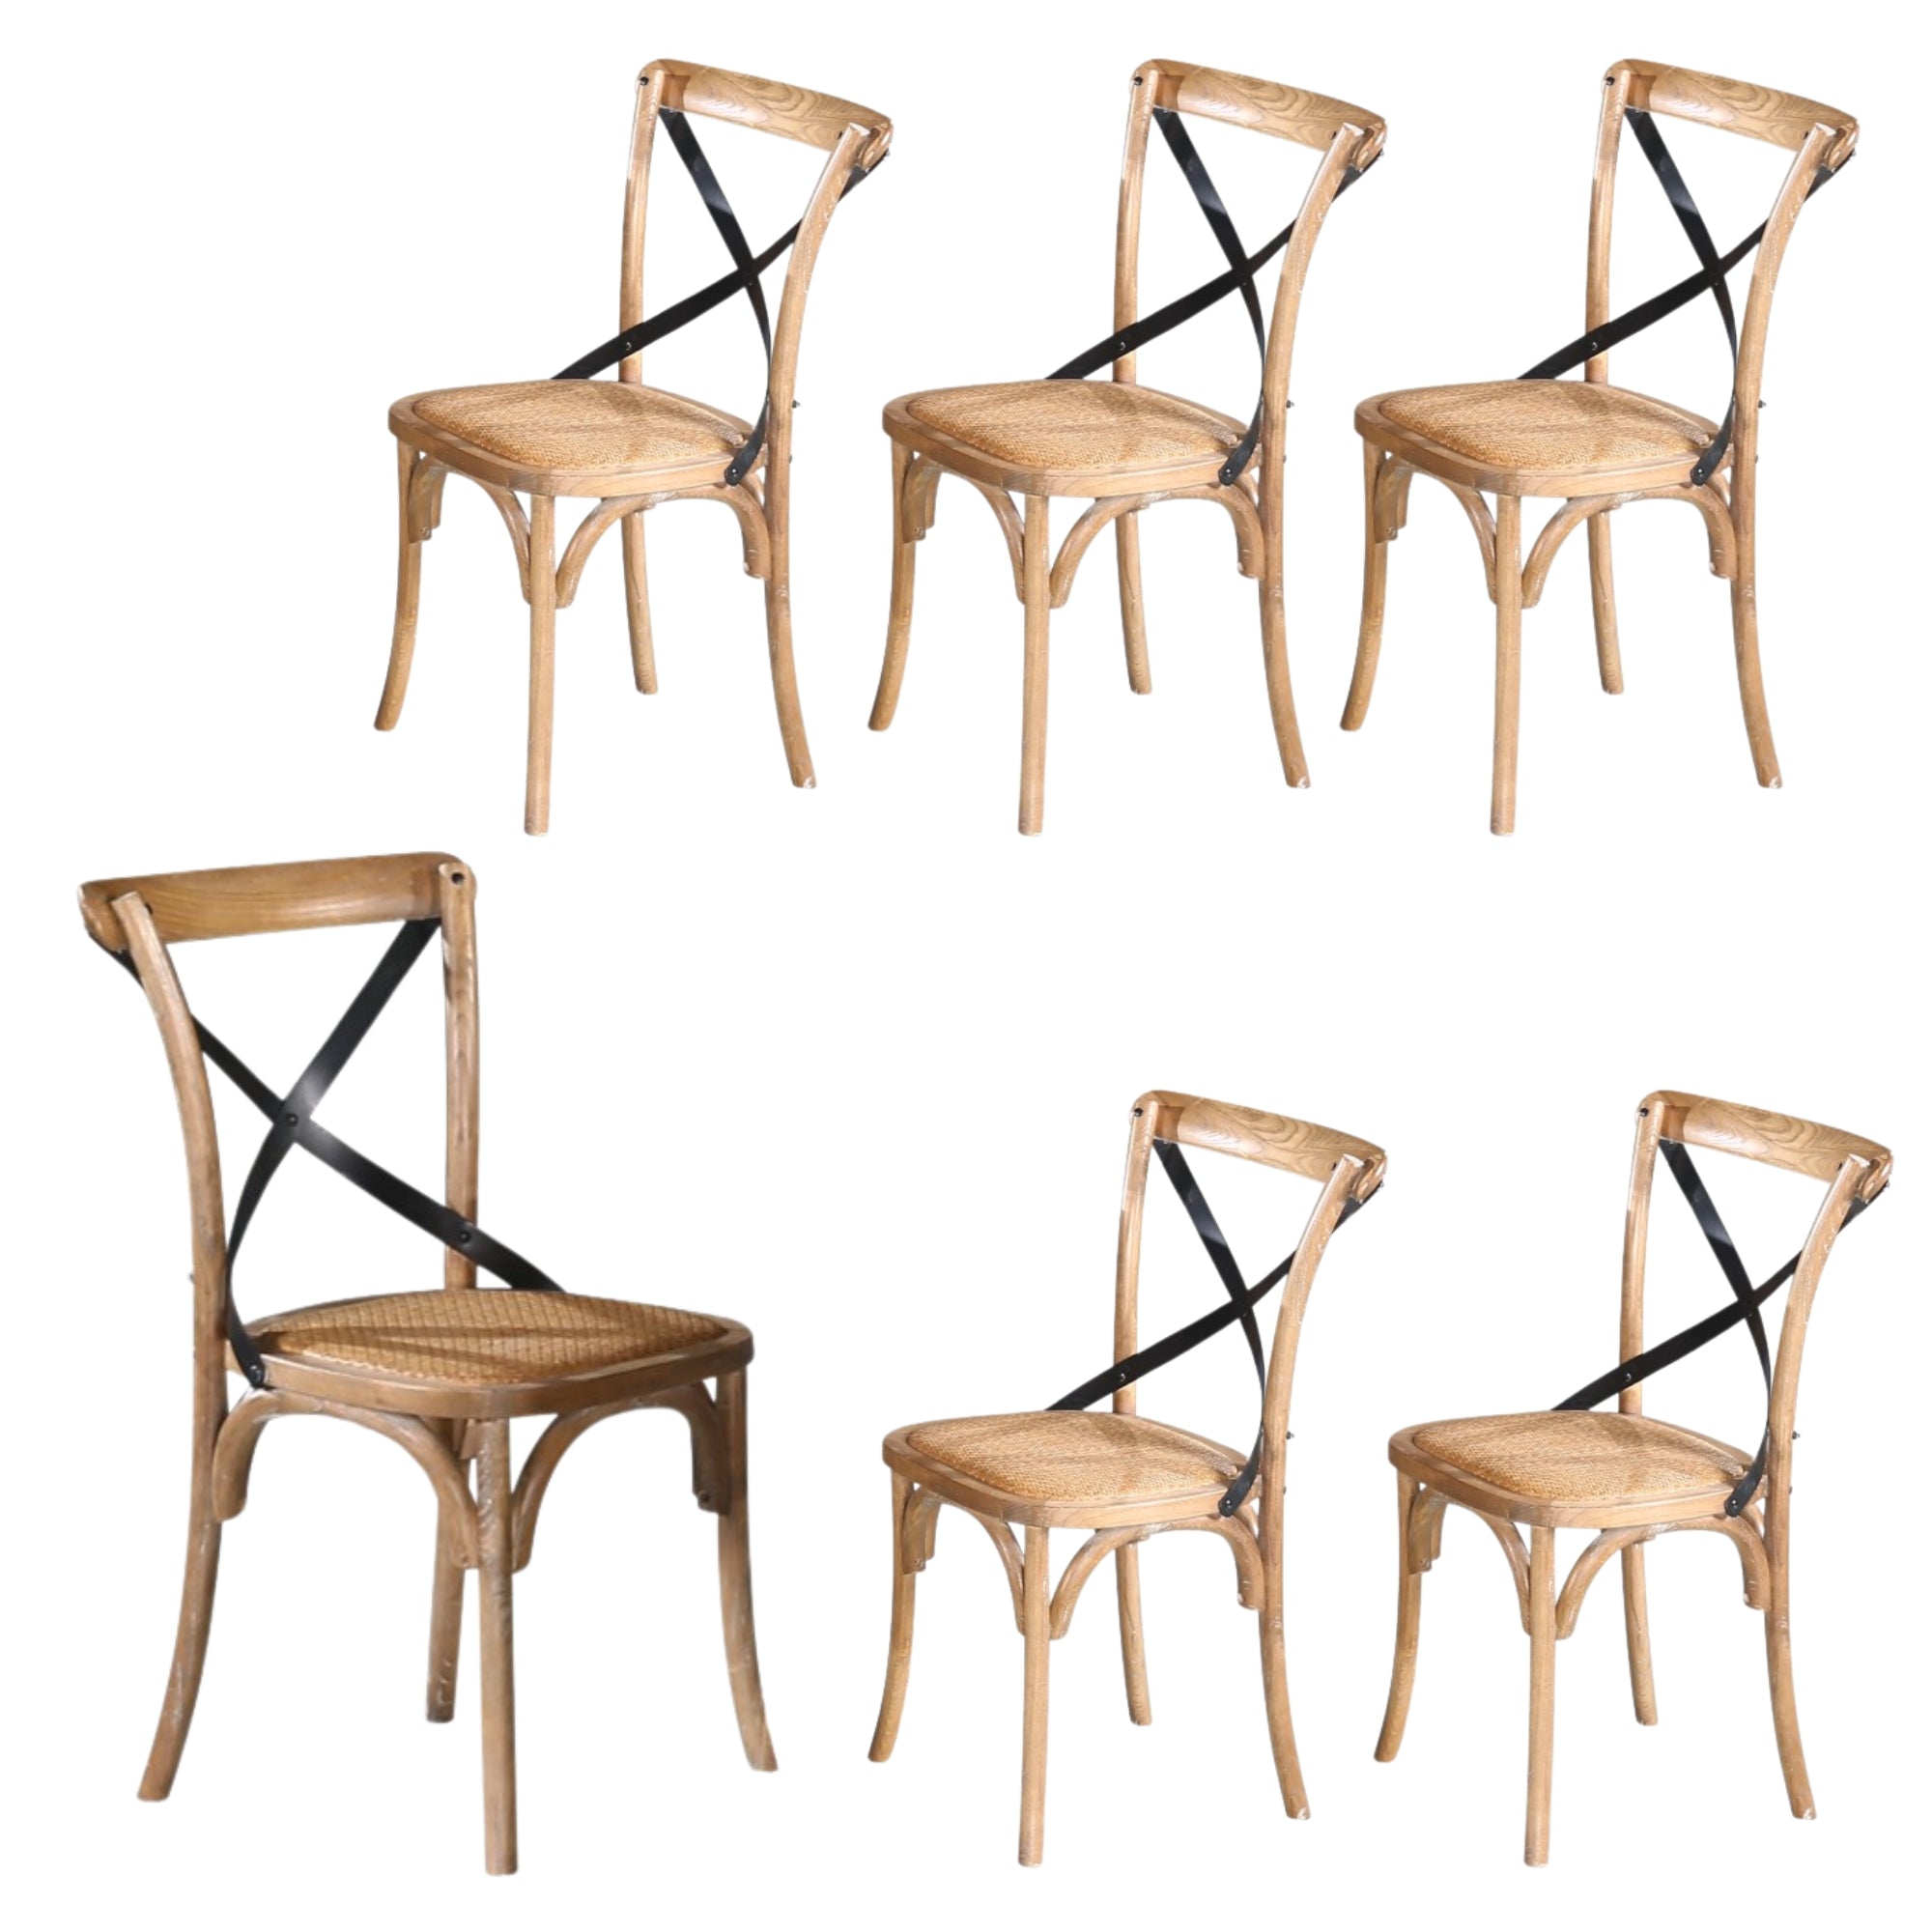 6pc Birchwood X-Back Dining Chairs, Woven Seat, Natural